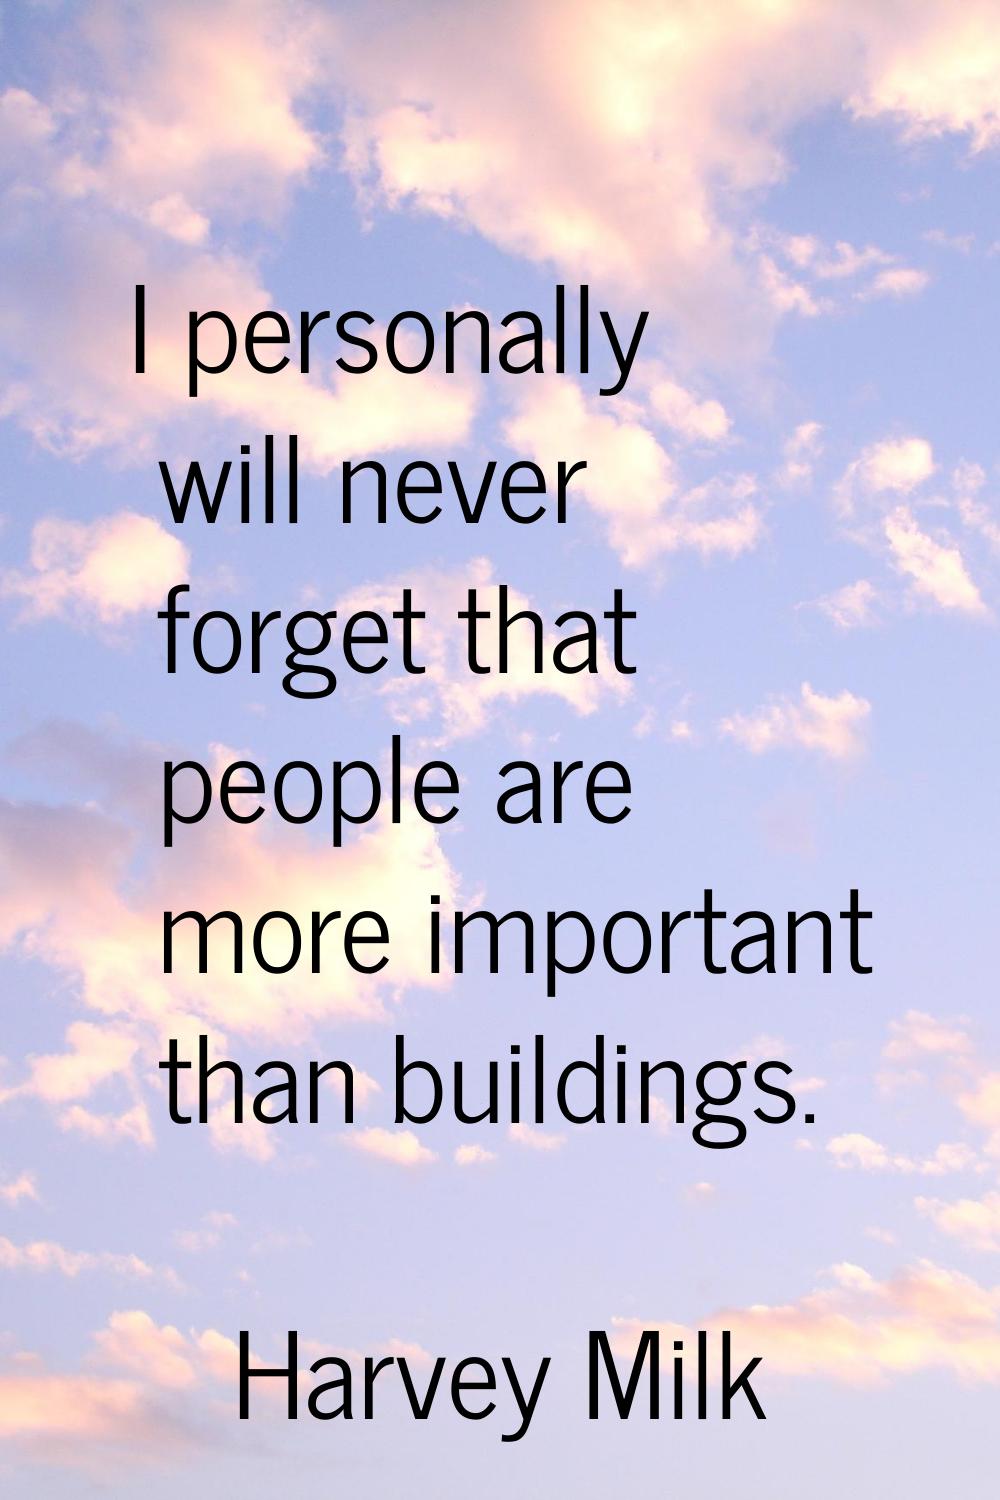 I personally will never forget that people are more important than buildings.